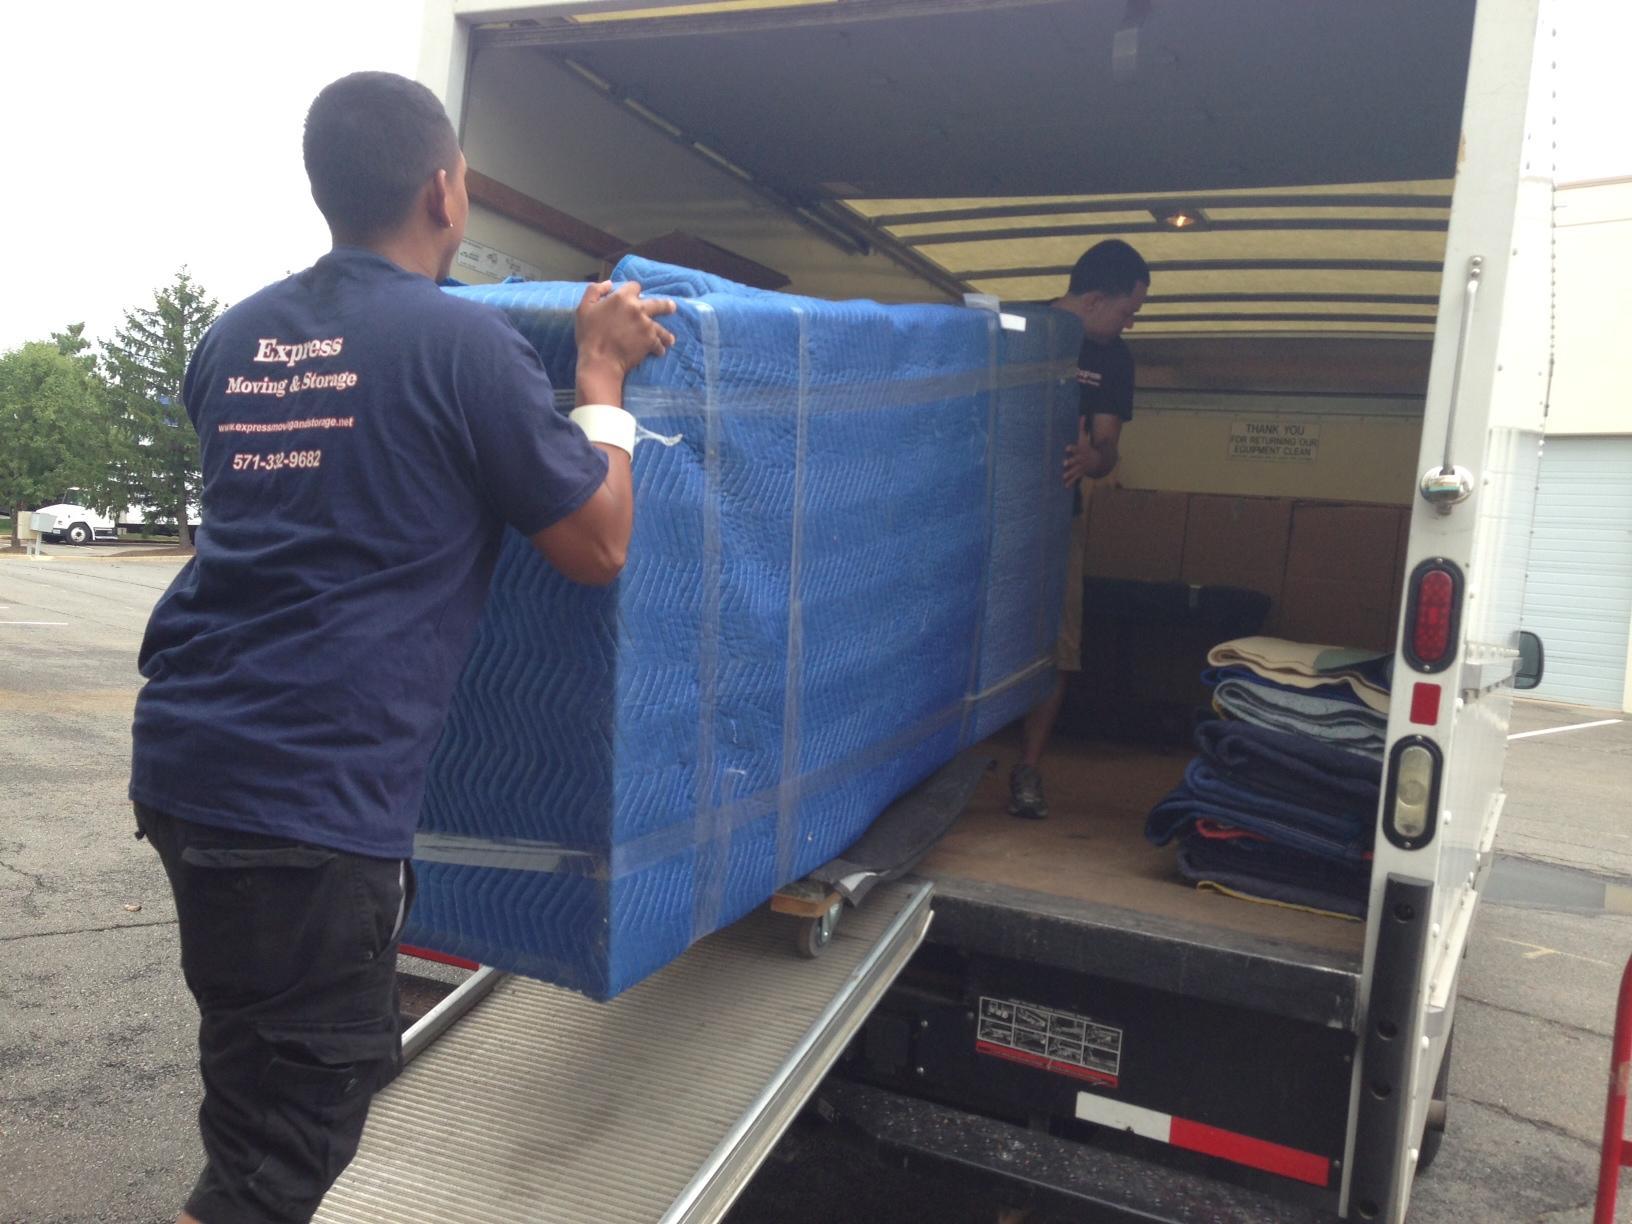 Express Movers wrap every piece of furniture in professional padding and then load into our trucks with care.